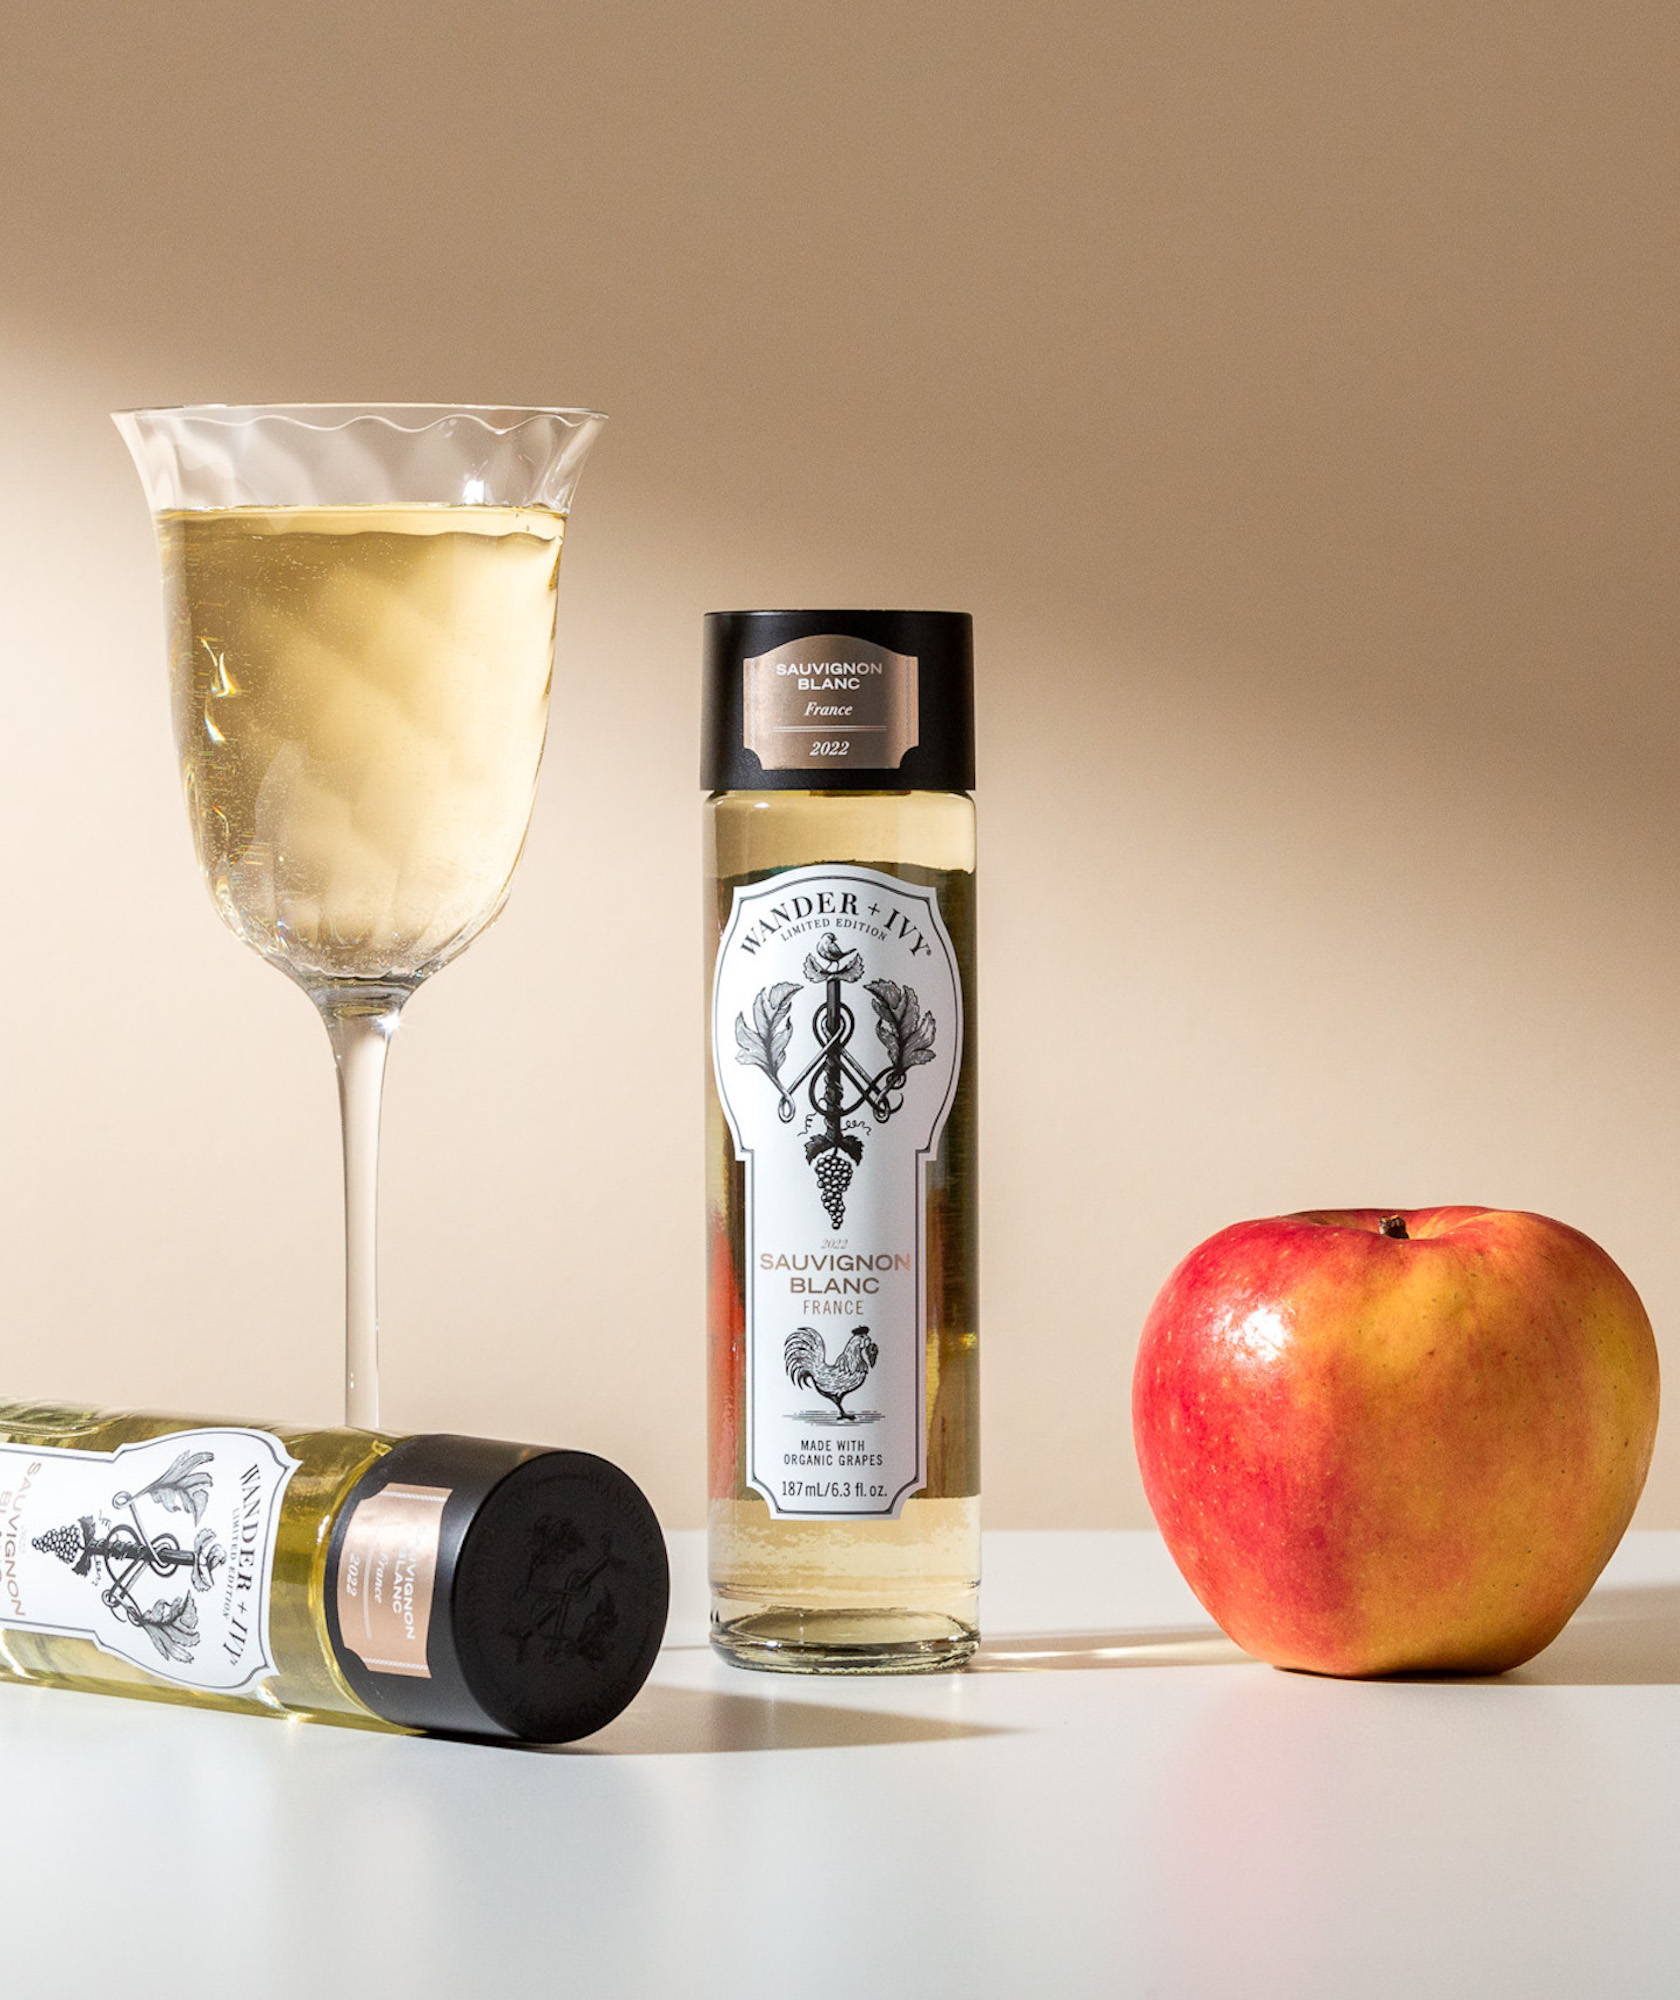 Two single-serve bottles of Sauvignon Blanc next to an apple and a filled wine glass